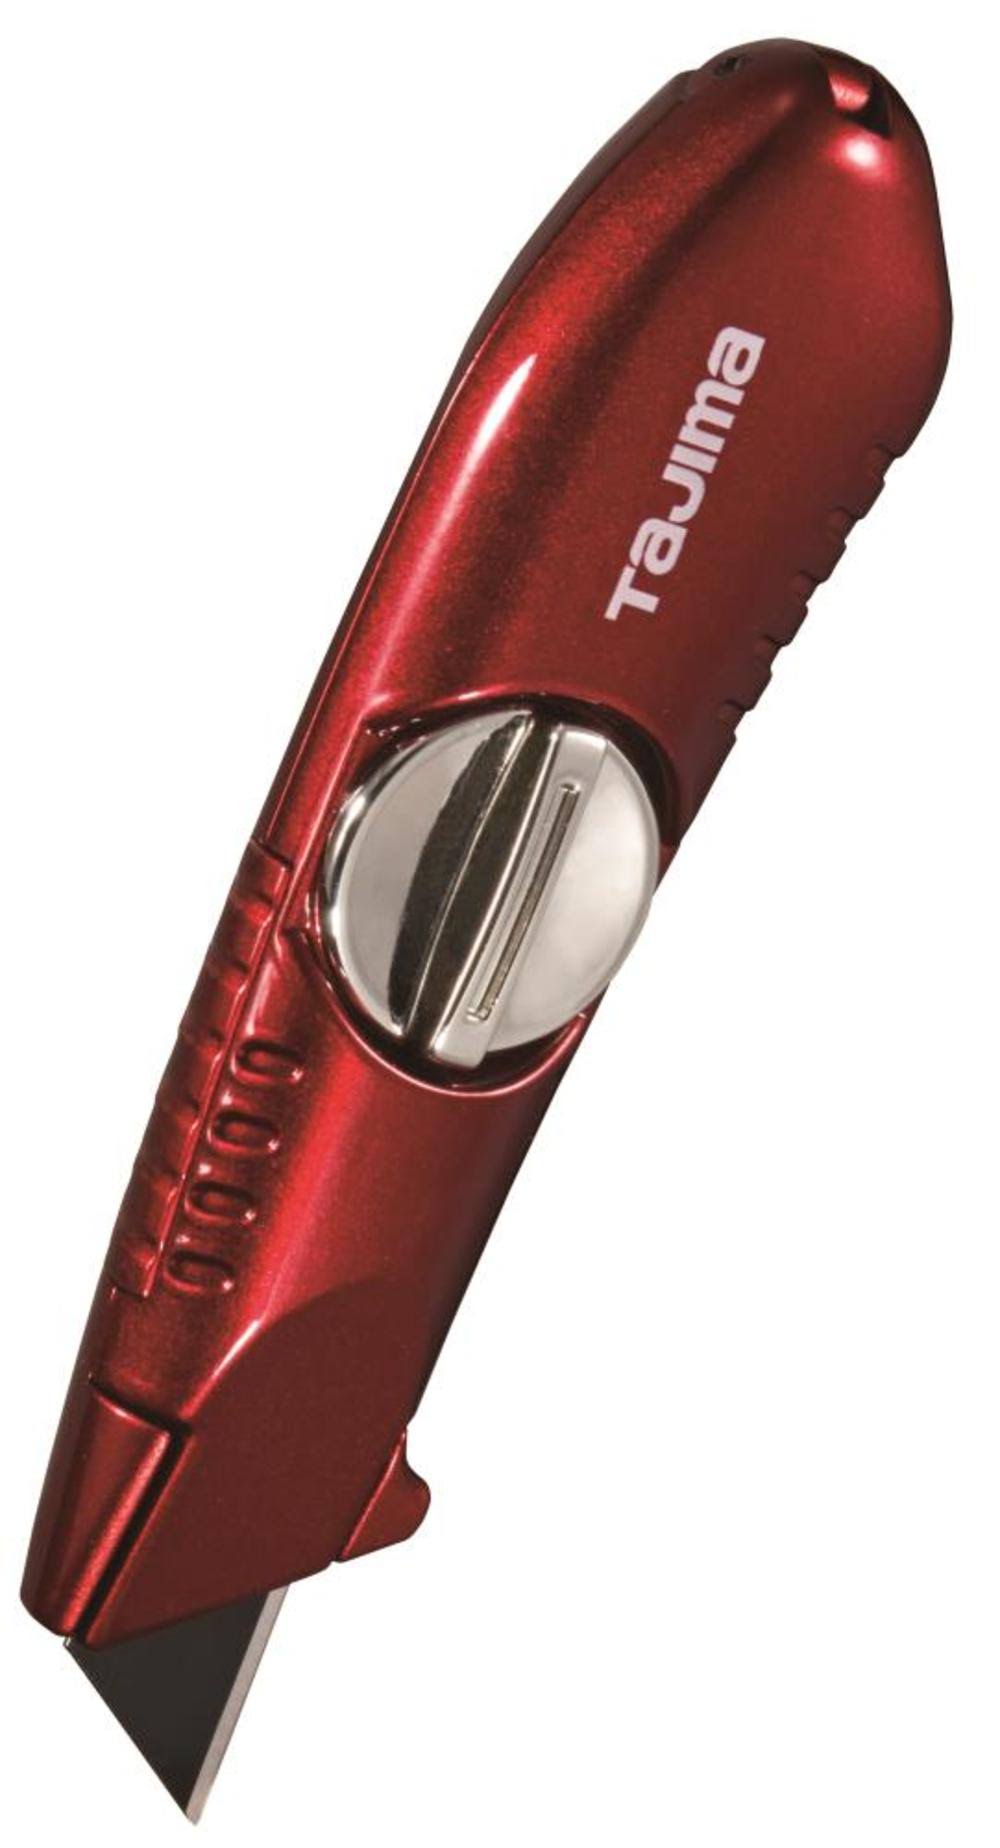 Tajima VR-101R VR-Series Fixed-Blade Utility Knife with 3 V-Rex Blades - Red